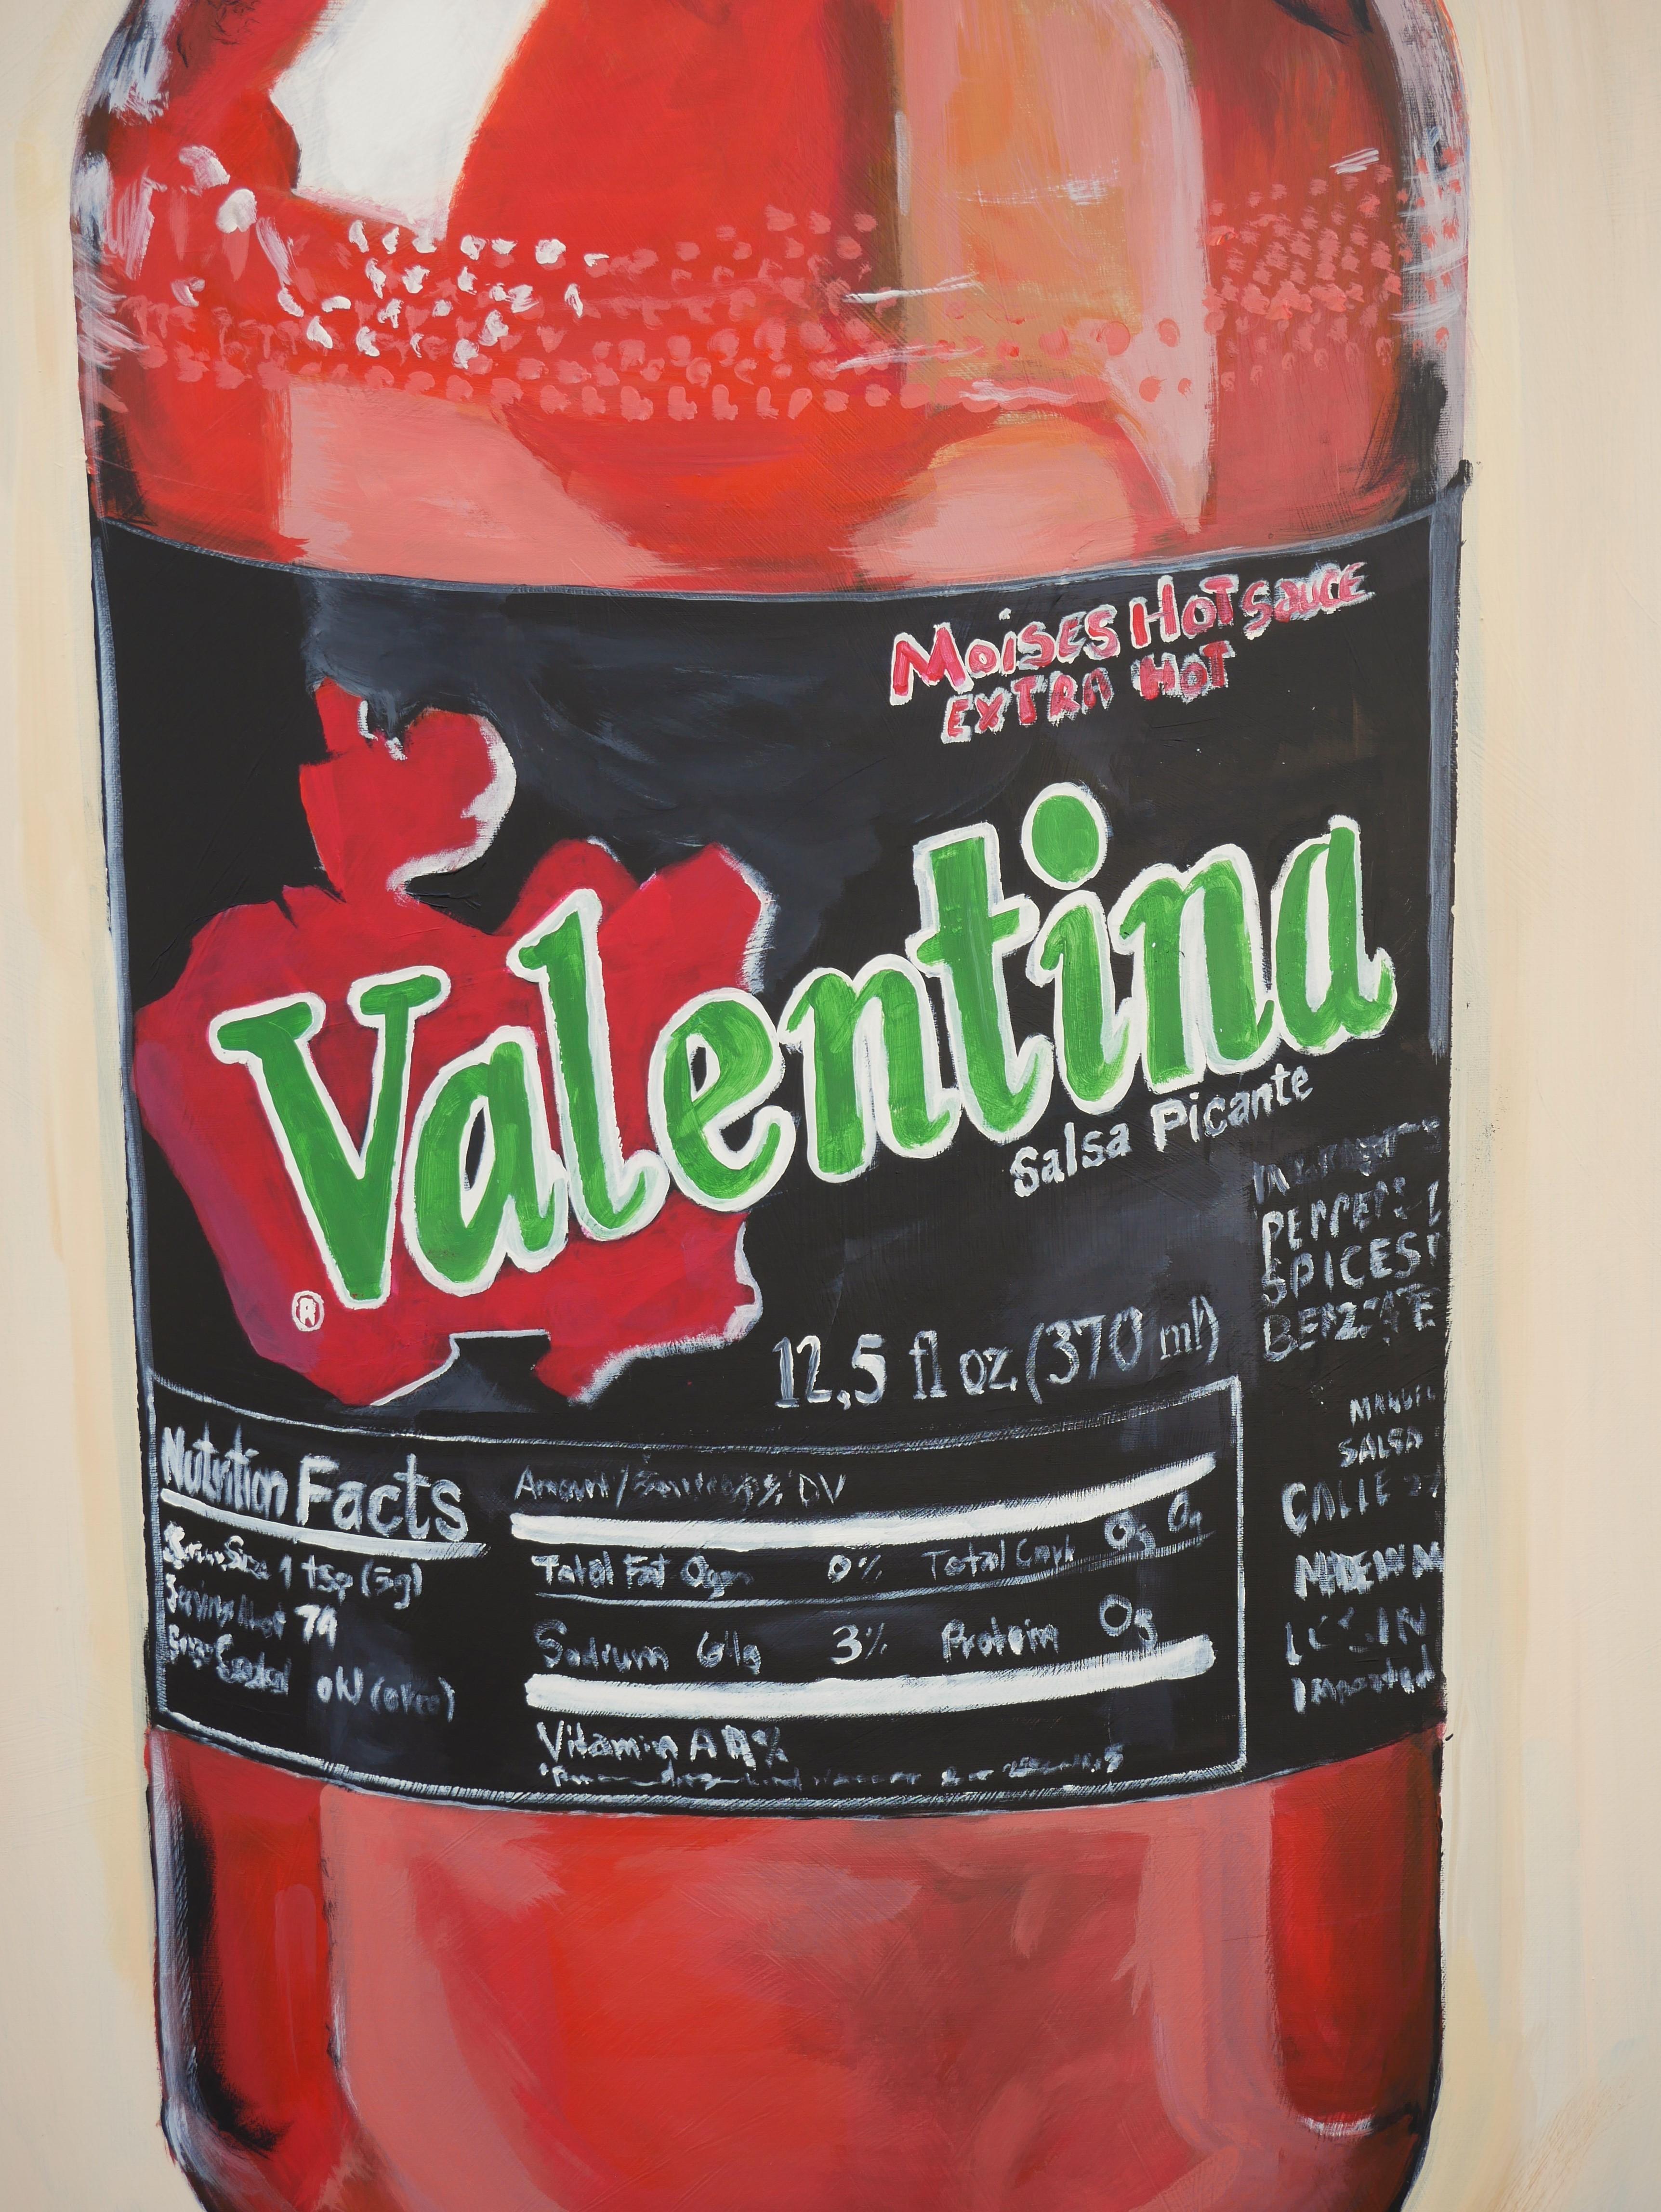 Contemporary Realist Red Toned Still Life Painting von Valentina Hot Sauce Flasche 5